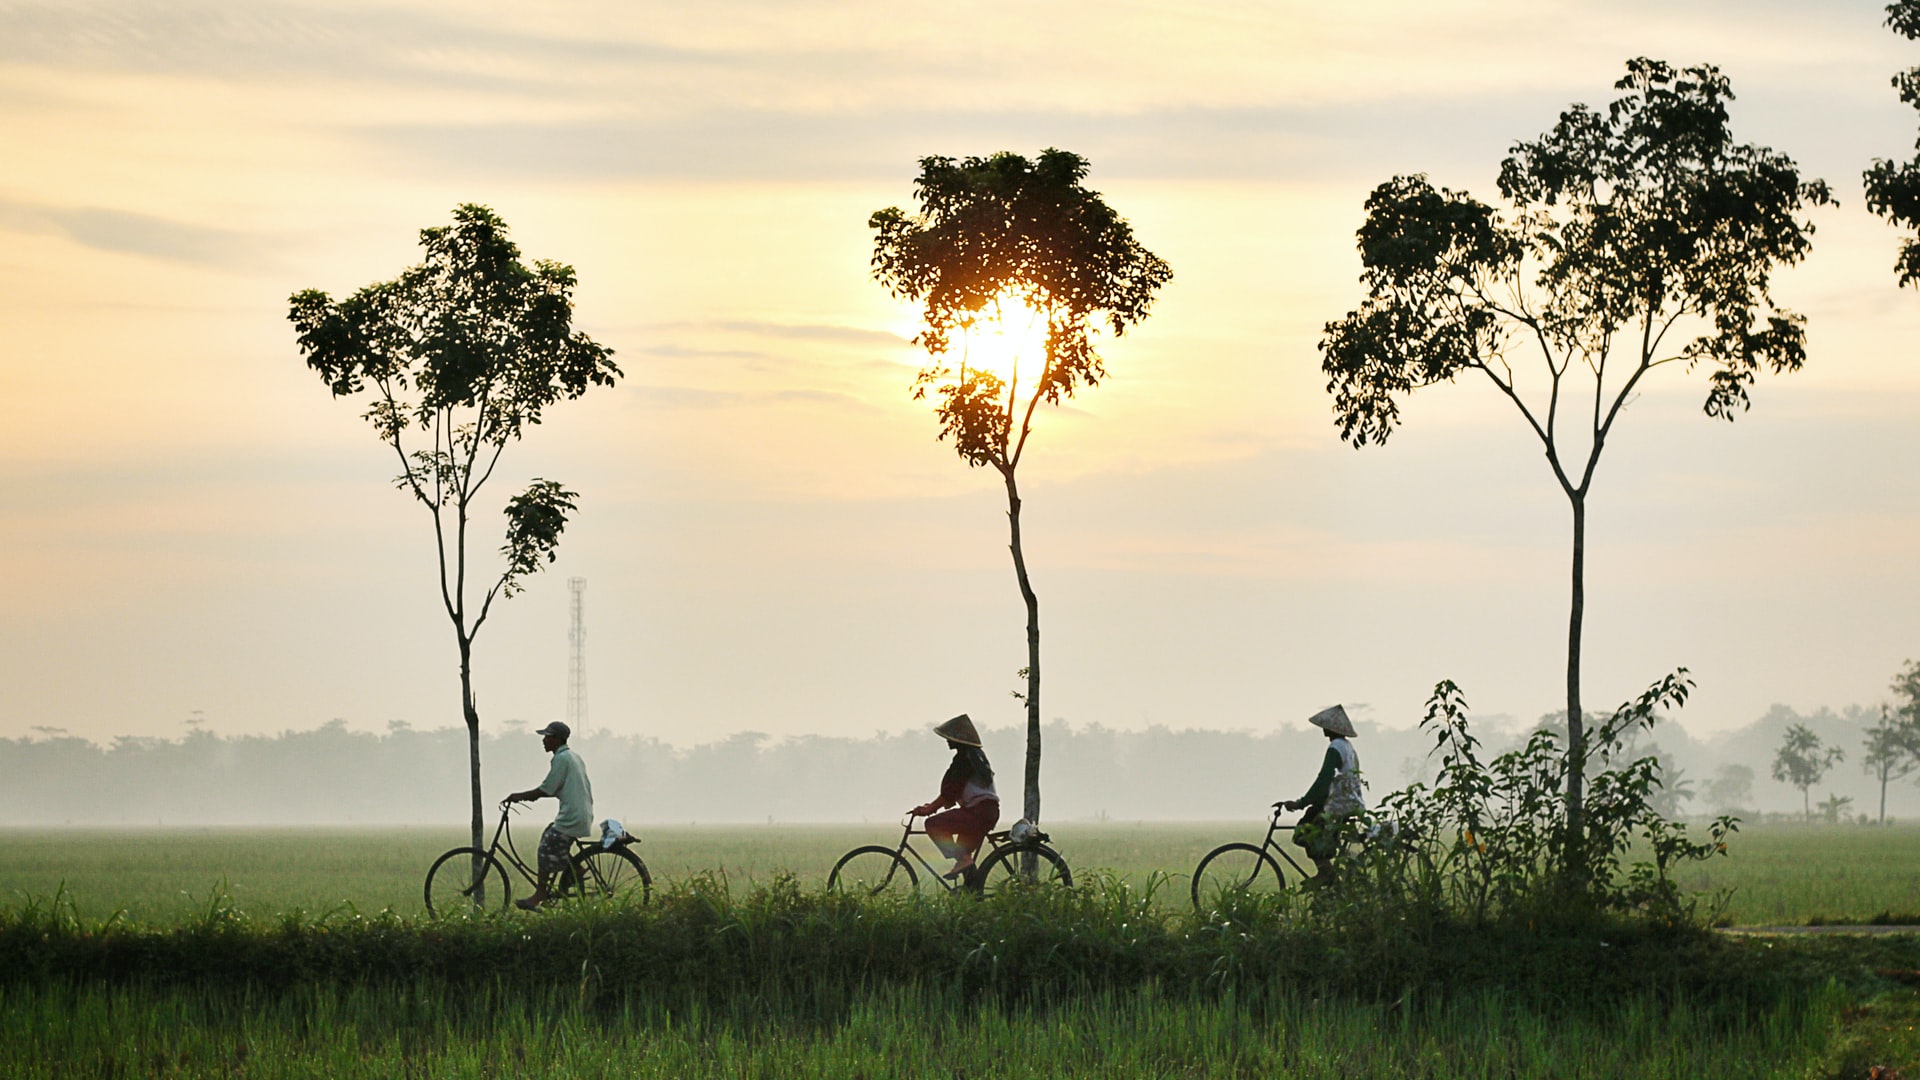 Three people on bicycles in Indonesia